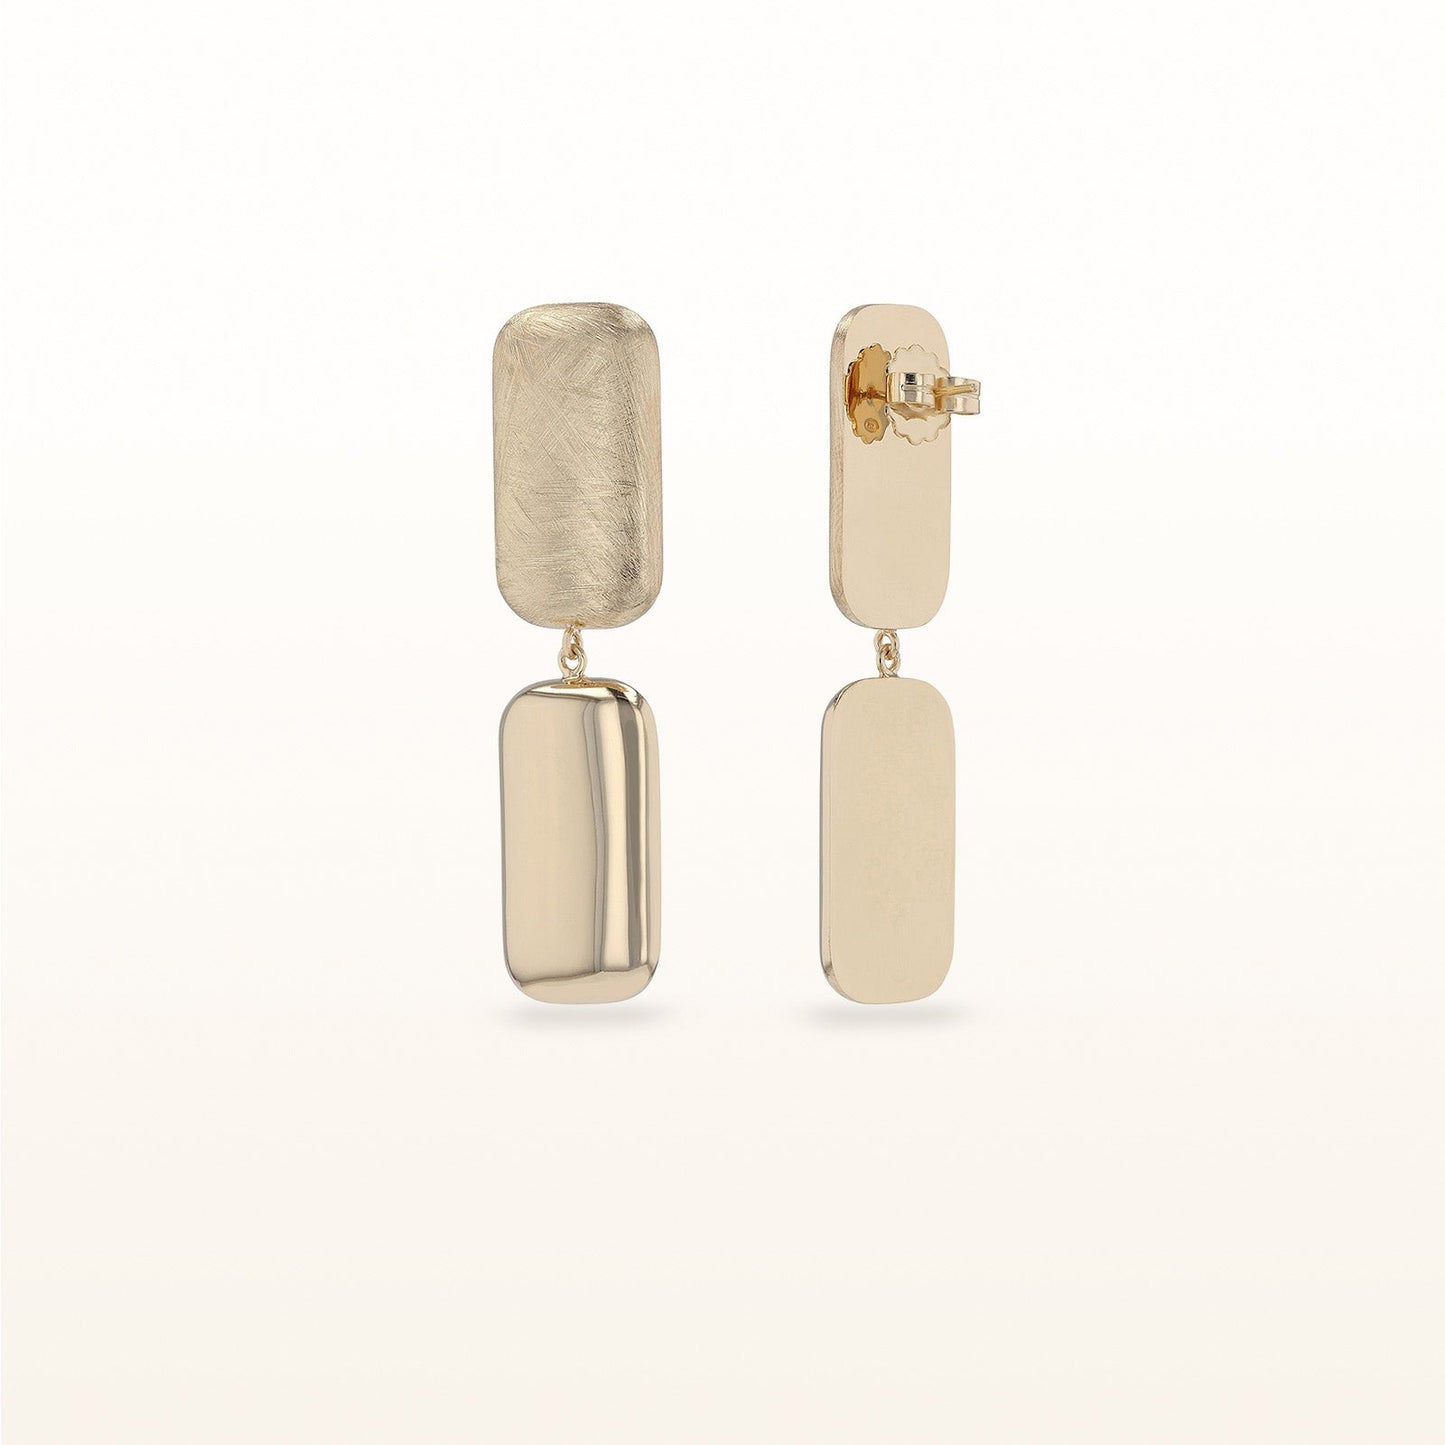 Rectangular Drop Earrings in Yellow Gold Plated Sterling Silver